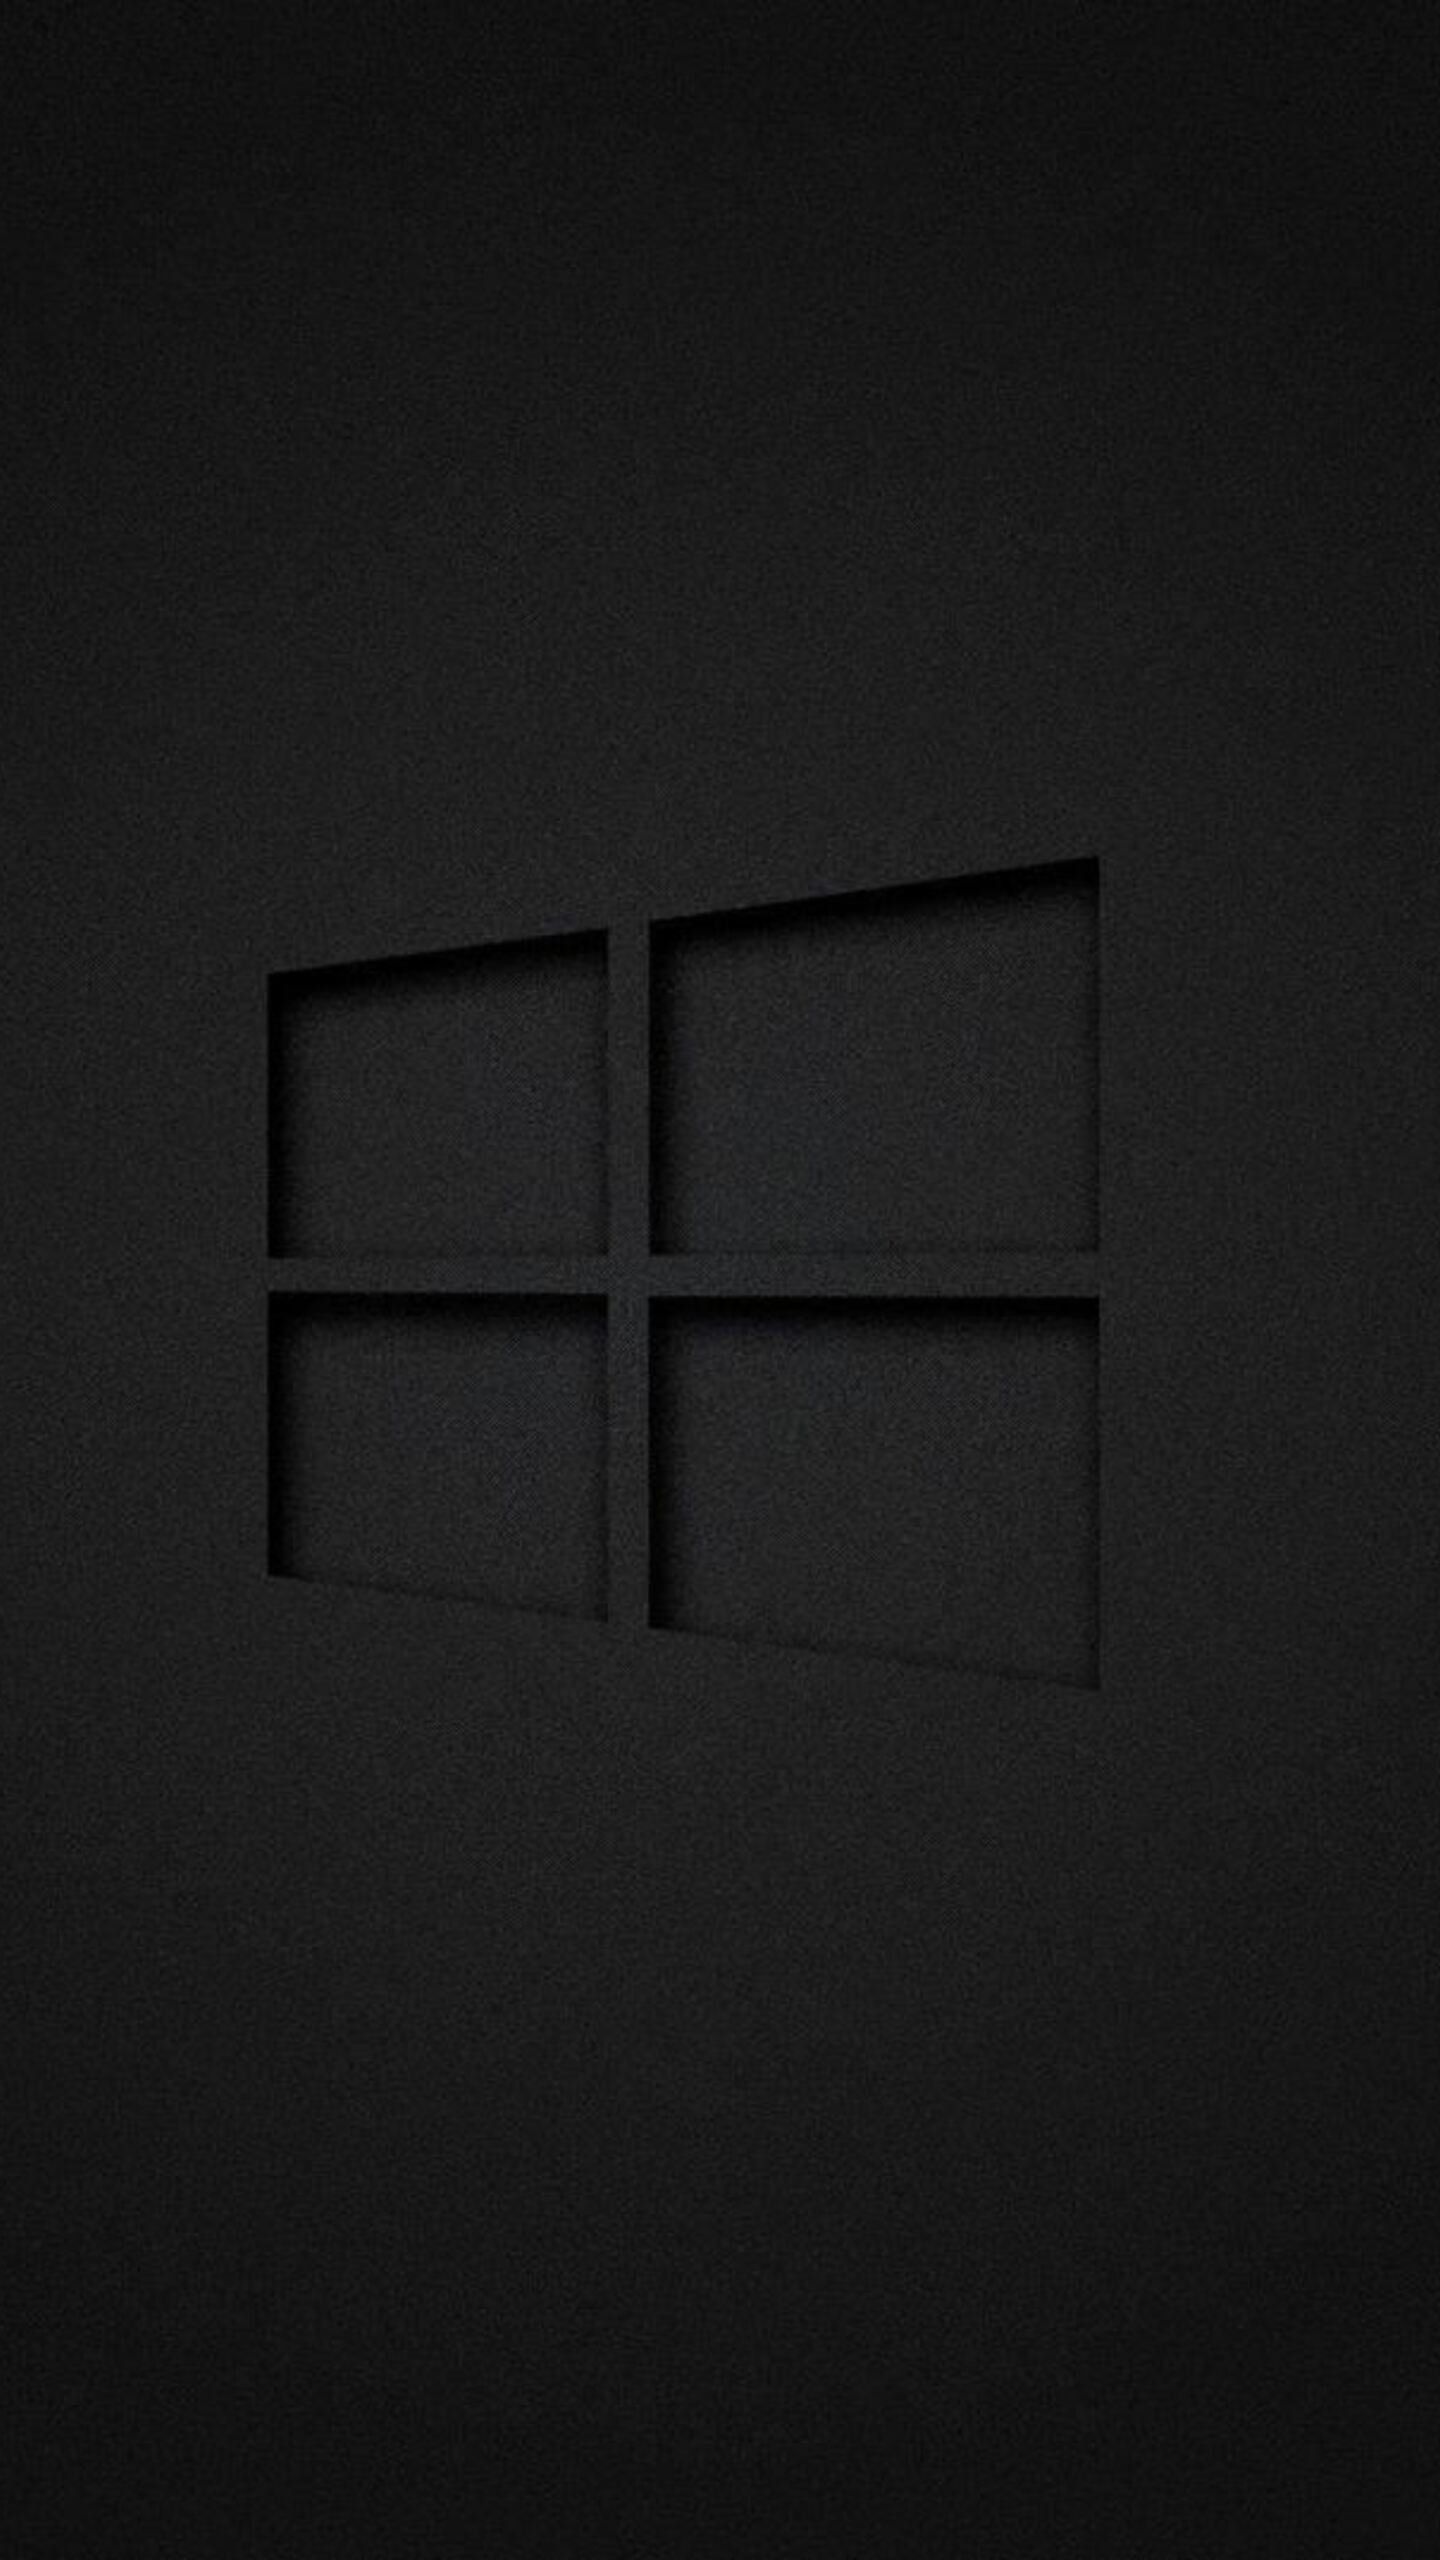 Windows 10 Dark, HD Computer Wallpapers Photos and Pictures in